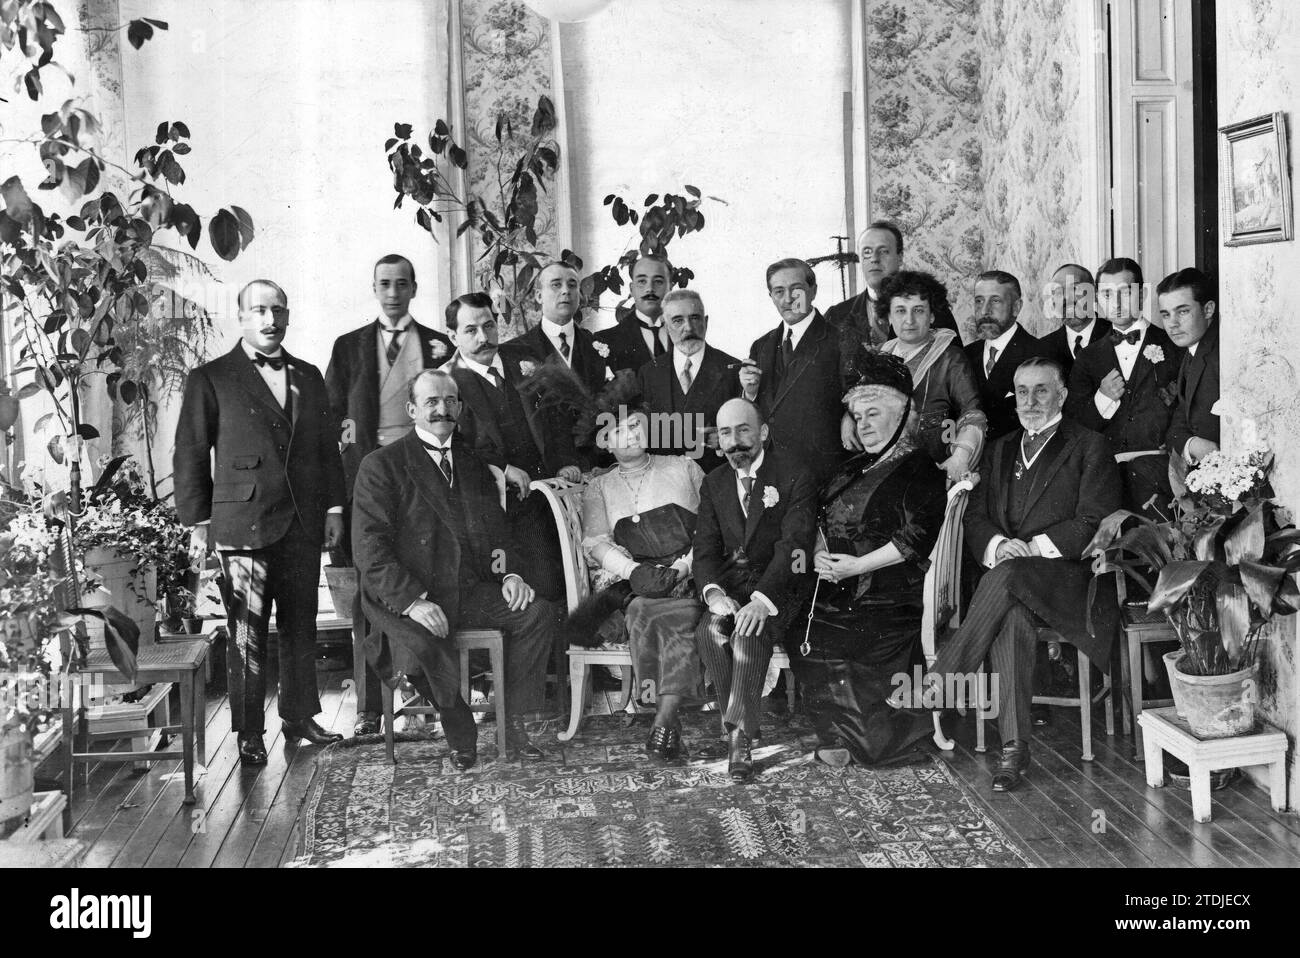 Madrid, 03/21/1914. Celebration of an illustrious playwright. Monsieur Paul Hervieu (x), surrounded by the personalities who attended the meal given in his honor by the illustrious artists María Guerrero and Fernando Díaz de Mendoza at his hotel on Zurbano Street: among the attendees were the Duchess of Montellano, Countess of San Luis, Countess of Pardo Bazán, the Ambassador of France, the Count of Romanones, Duke of Montellano, Count of San Luis, Benavente, Marquina, Ramos Carrión, Mariano Díaz de Mendoza, Fernando, Luis and Carlos Mendoza, and the Marquis of Valdeiglesias. Credit: Album / A Stock Photo